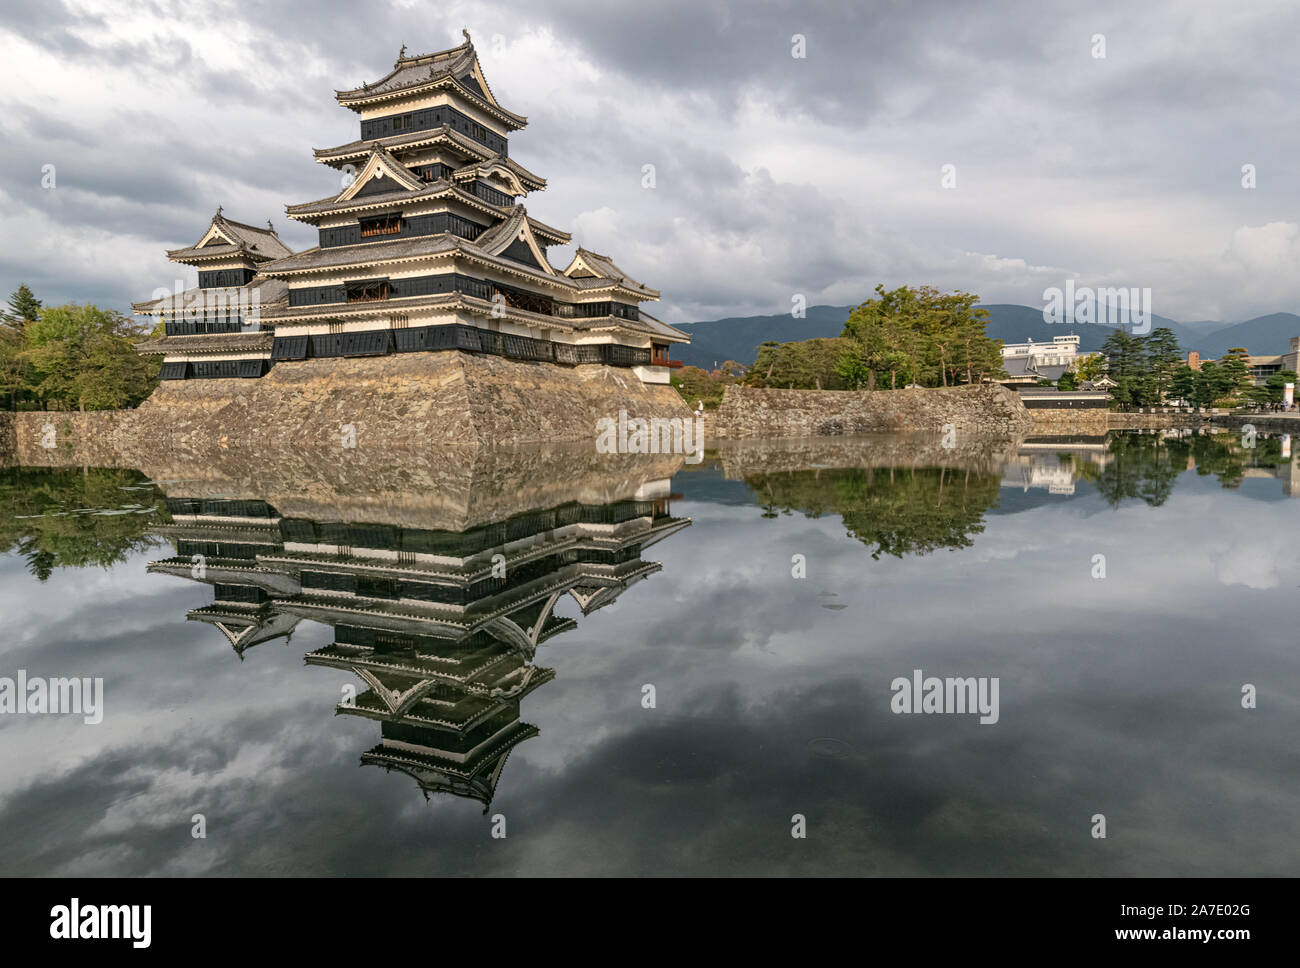 Matsumoto Castle (Crow Castle) - one of Japan's most important historic castles - water reflection. Stock Photo